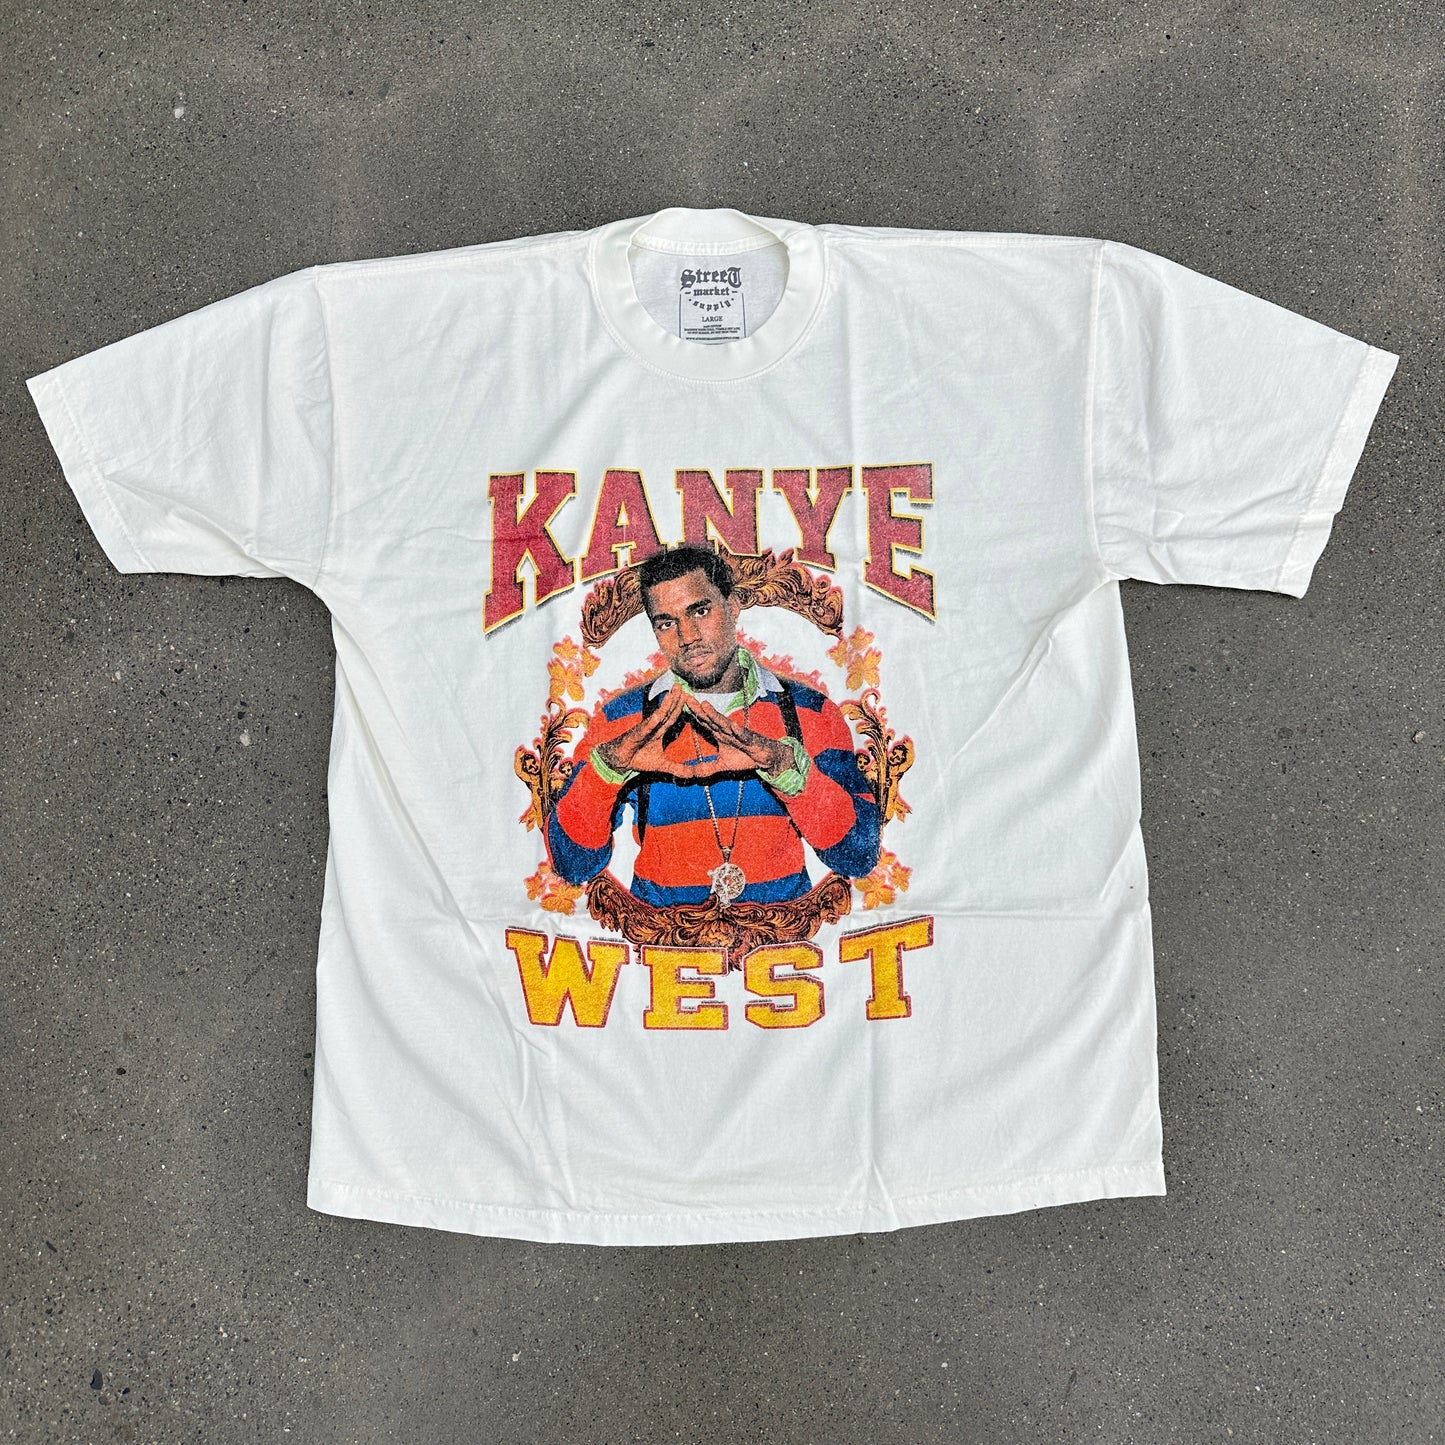 SMS Kanye West College Dropout (White) (Multiple Sizes)